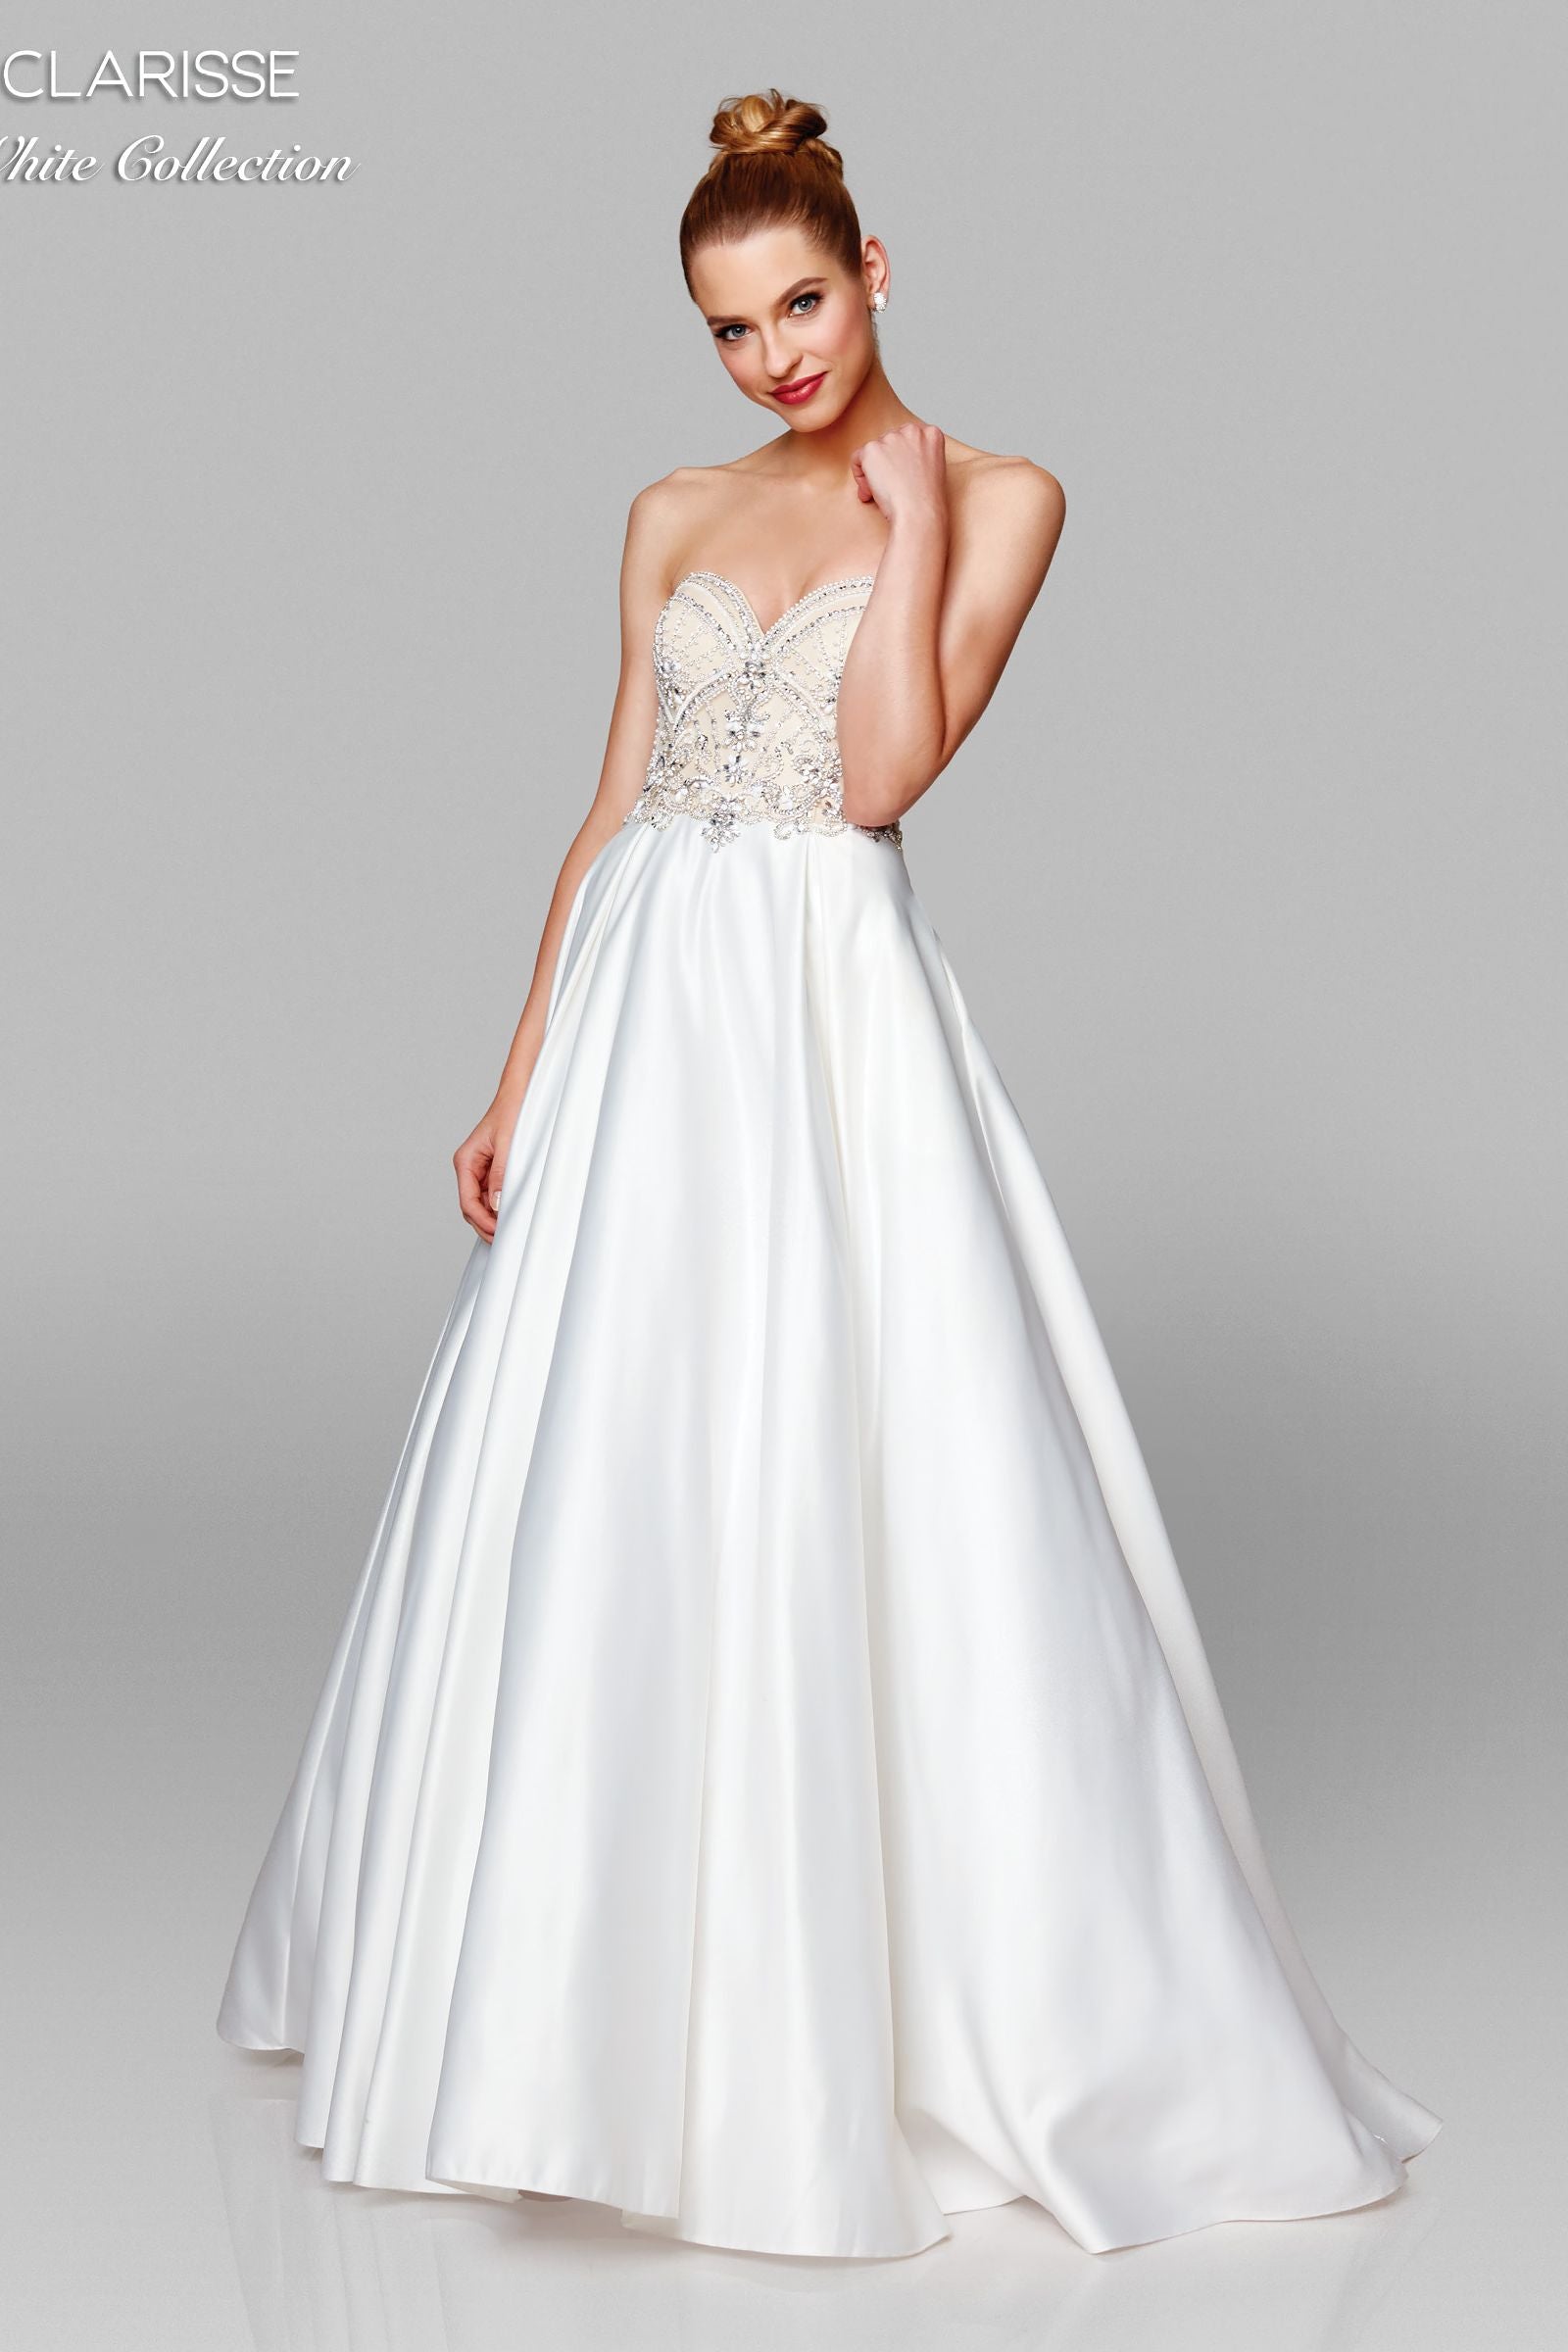 Clarisse -600157 Beaded Bodice Strapless Bridal Gown